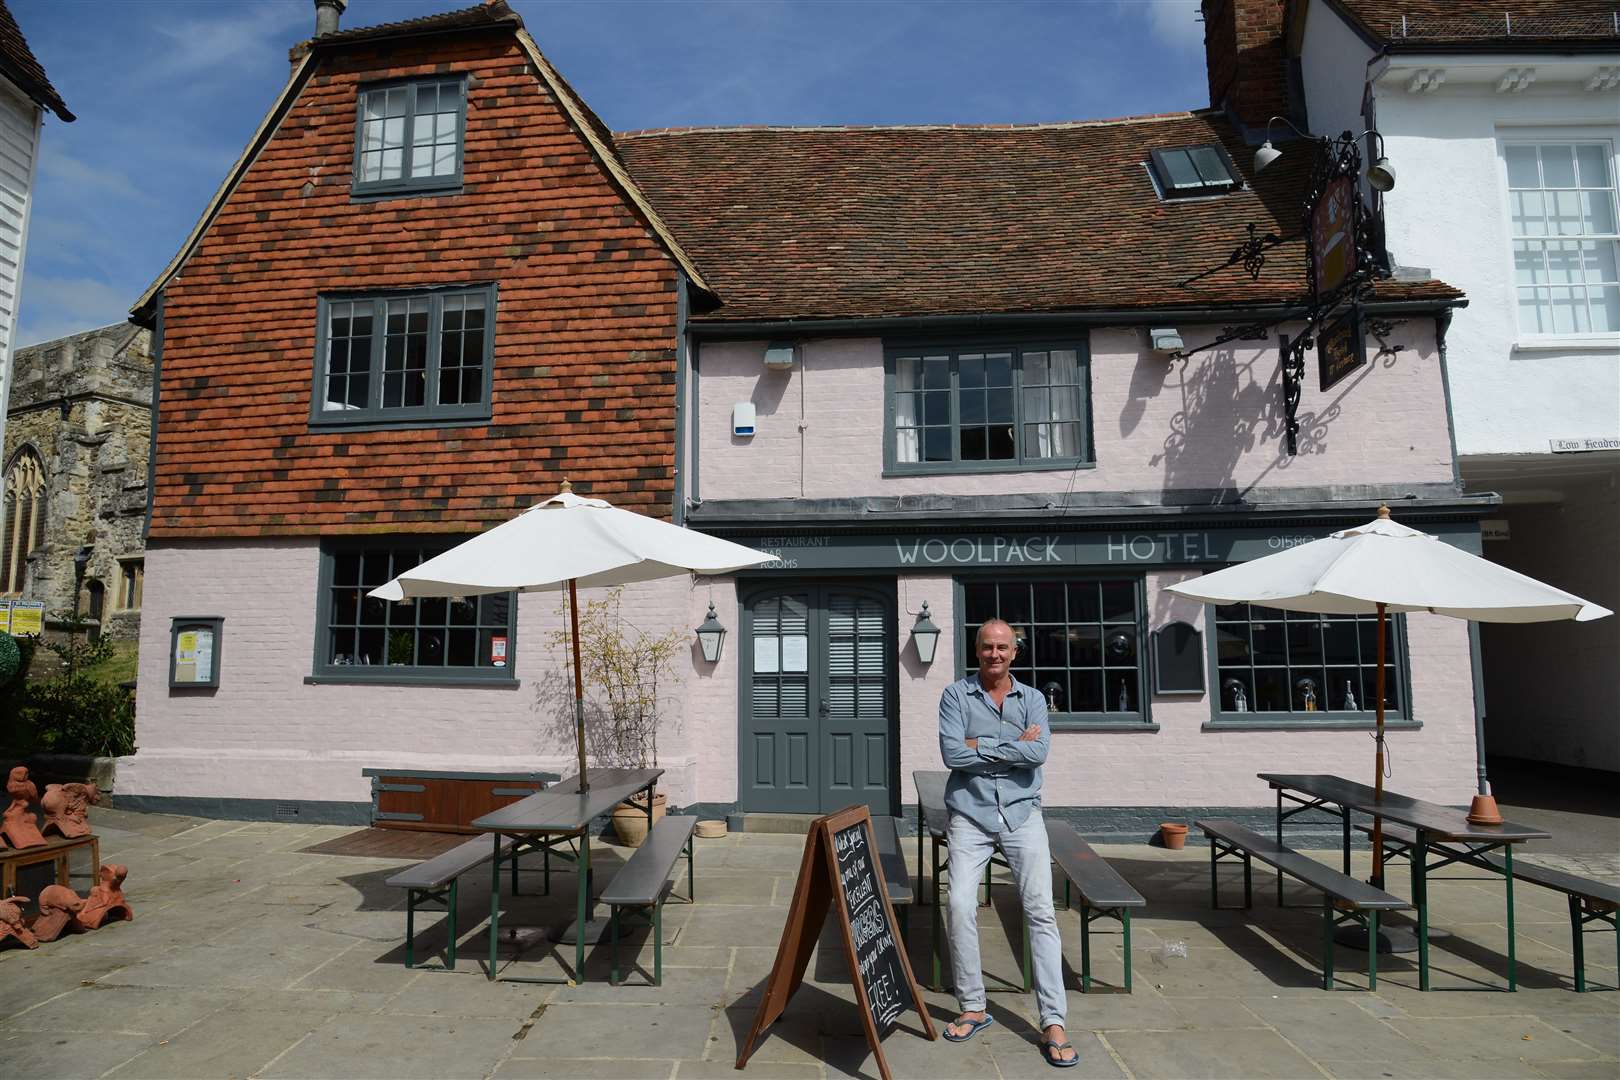 Landlord Rob Cowan outside The Woolpack Hotel in Tenterden which he has painted pink